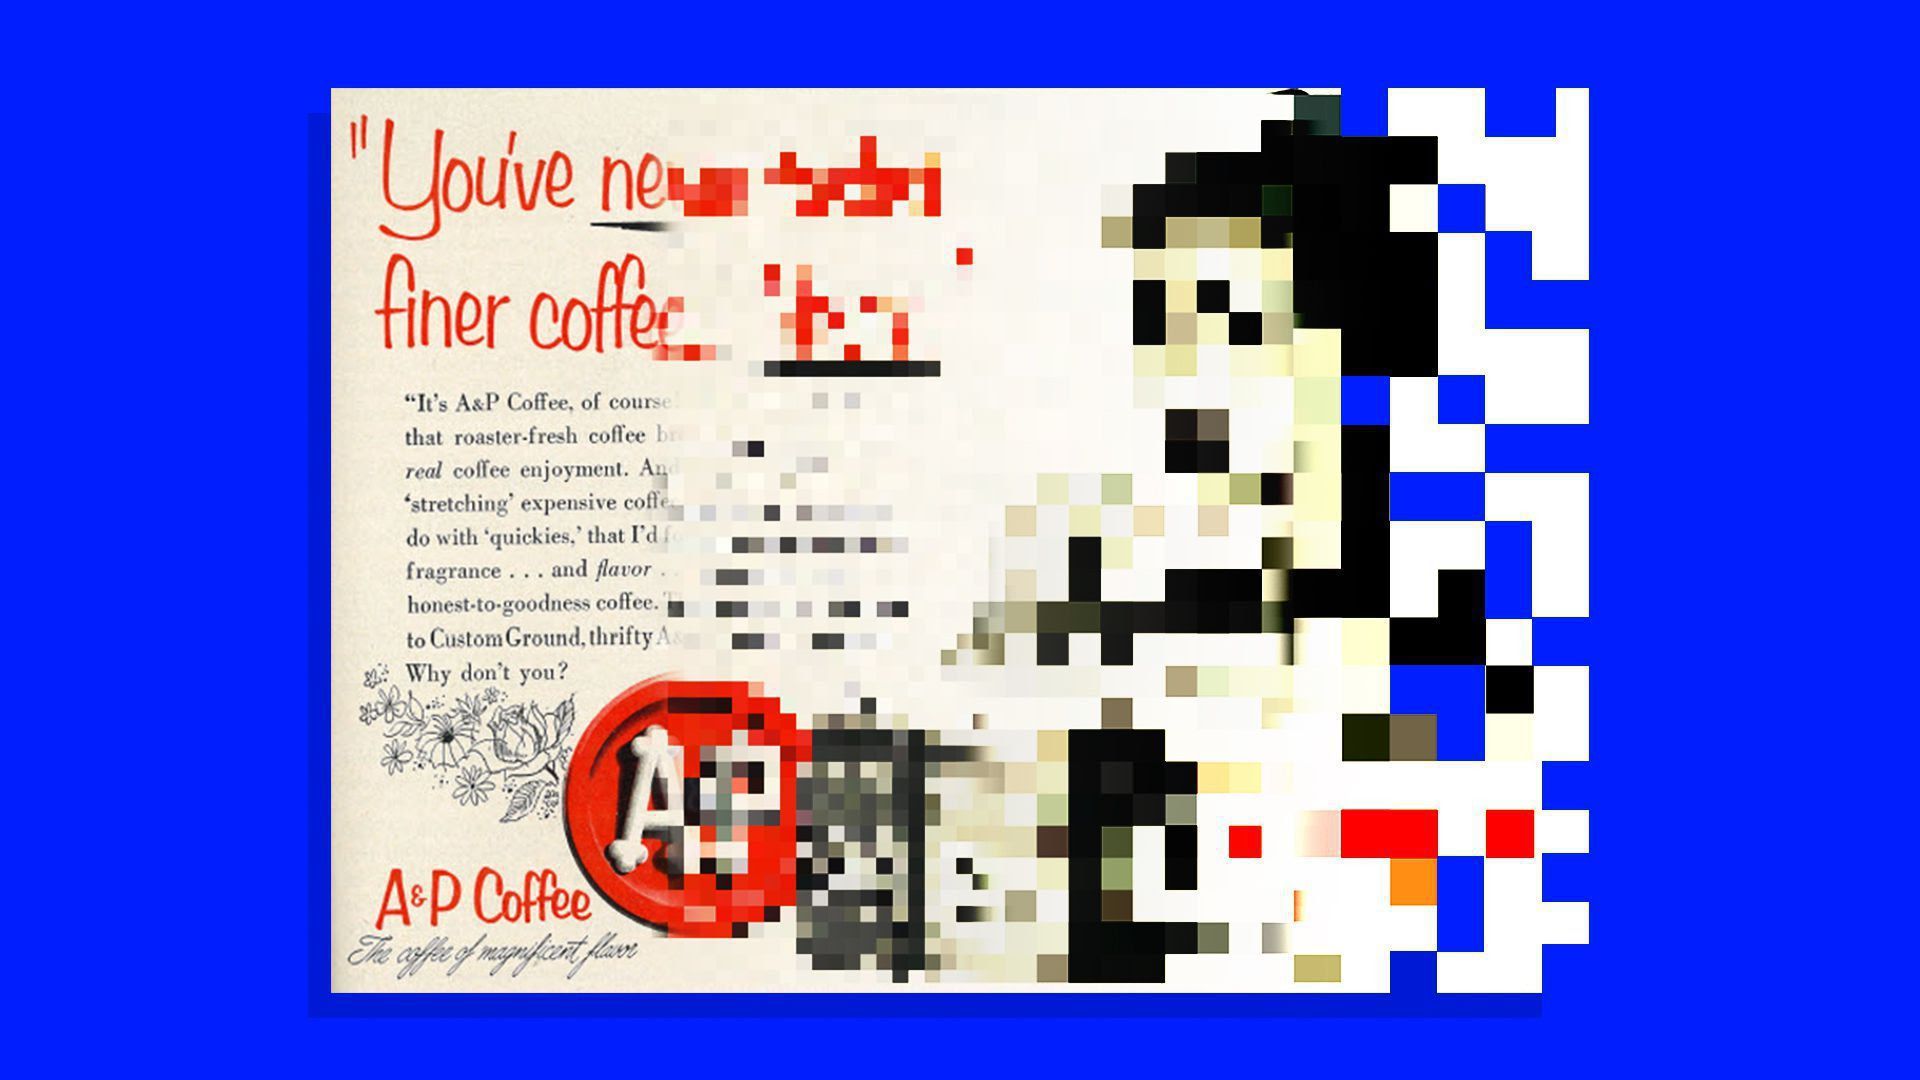 Old fashioned magazine advertisement bleeds into pixelated digital ad